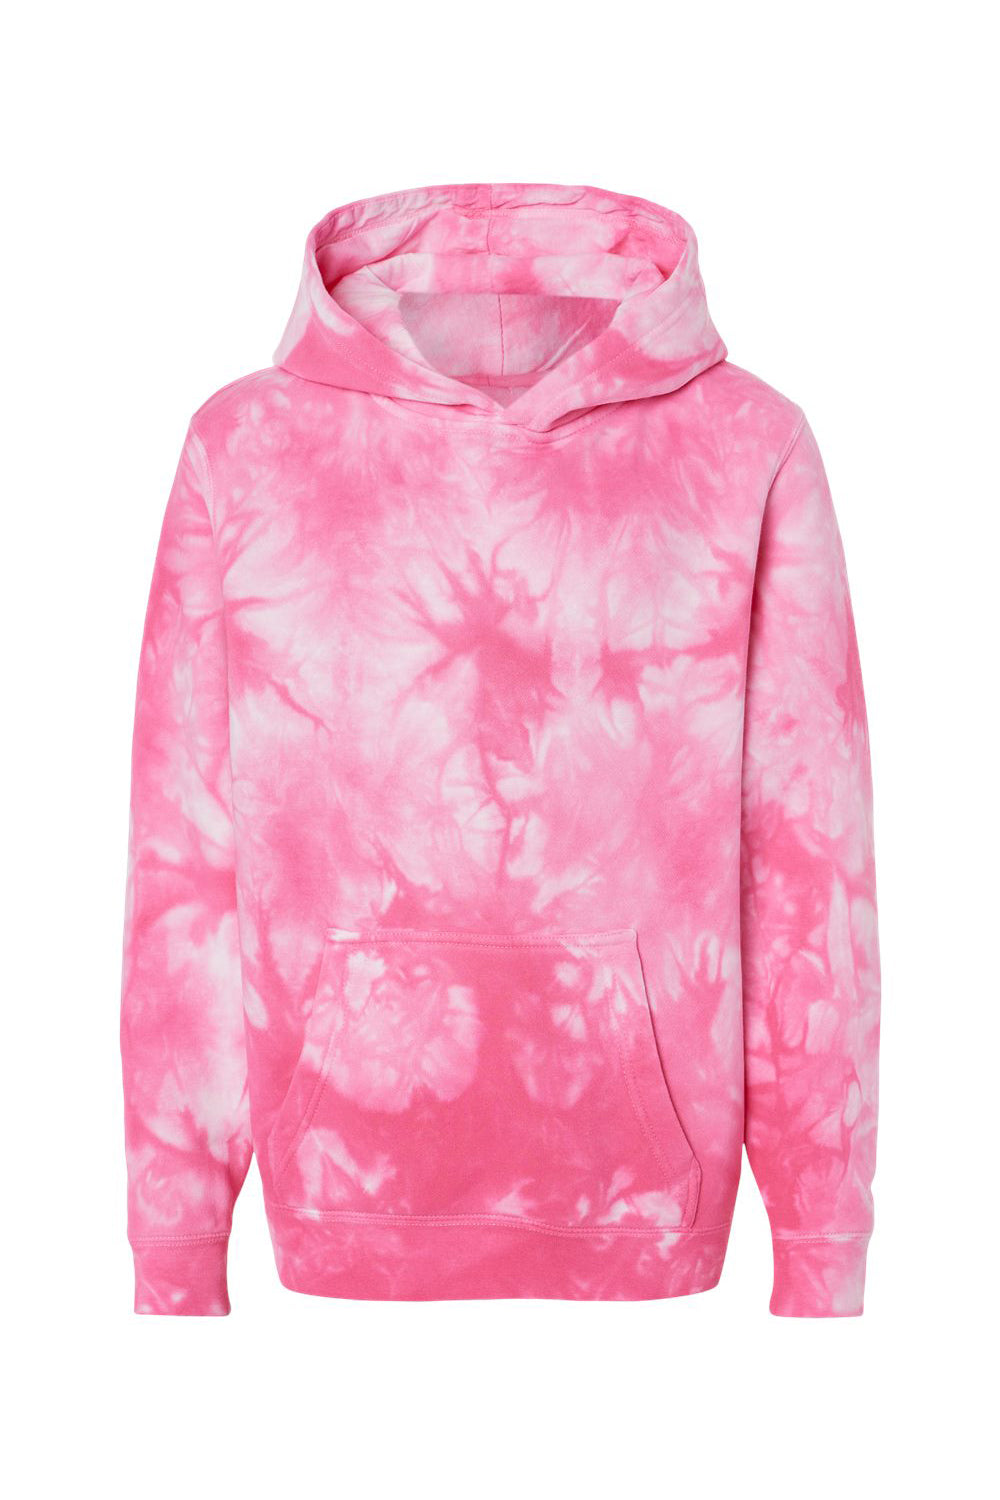 Independent Trading Co. PRM1500TD Youth Tie-Dye Hooded Sweatshirt Hoodie Pink Flat Front